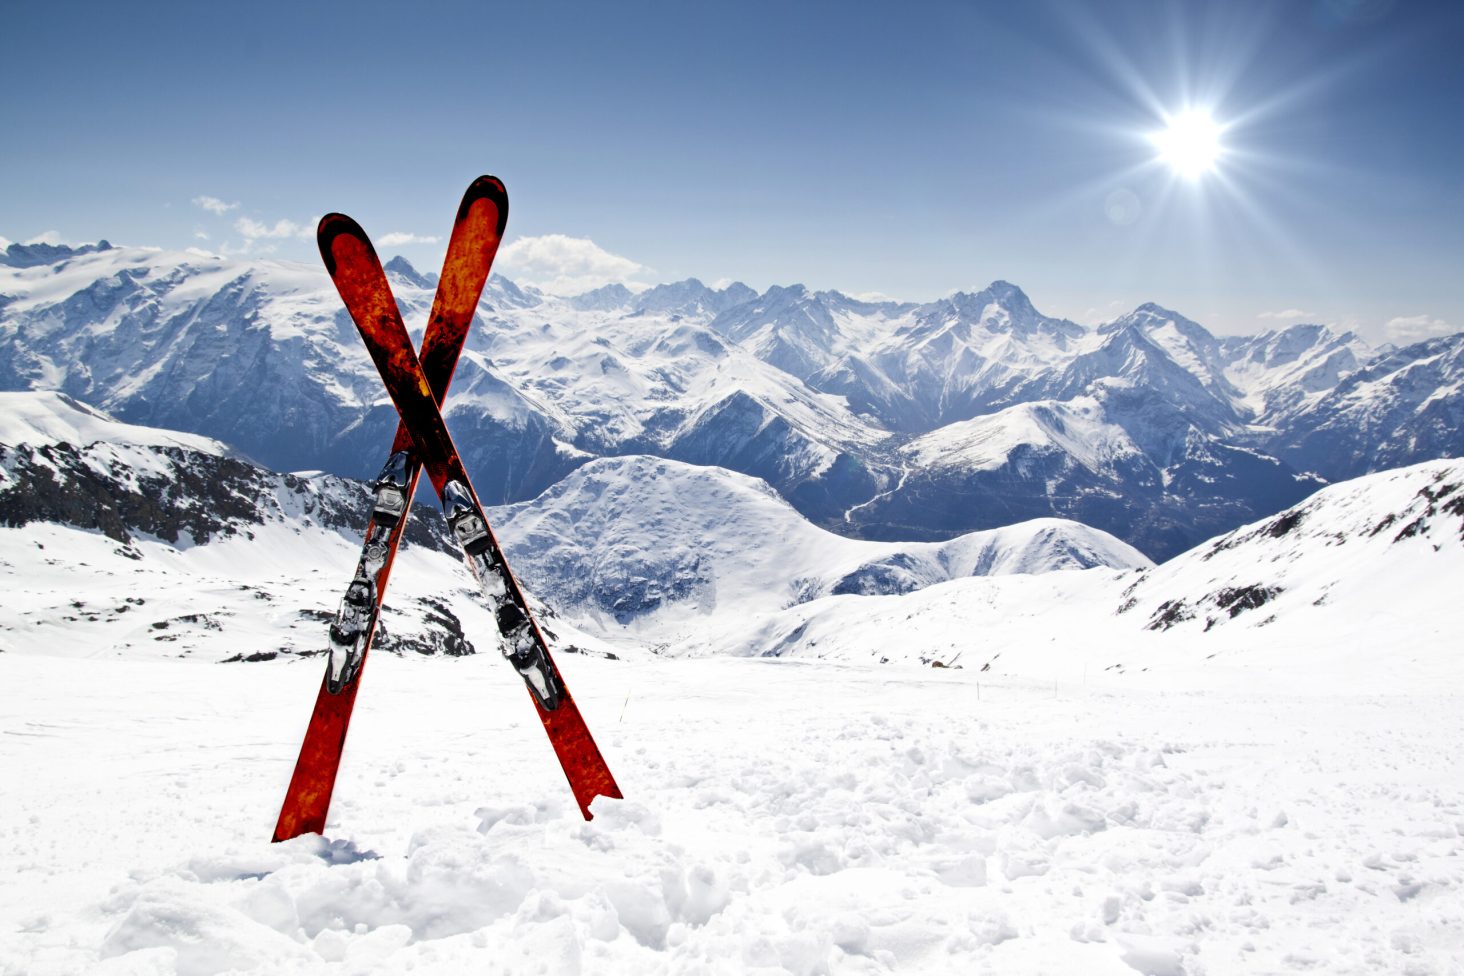 Pair of cross skis in snow in front of mountains